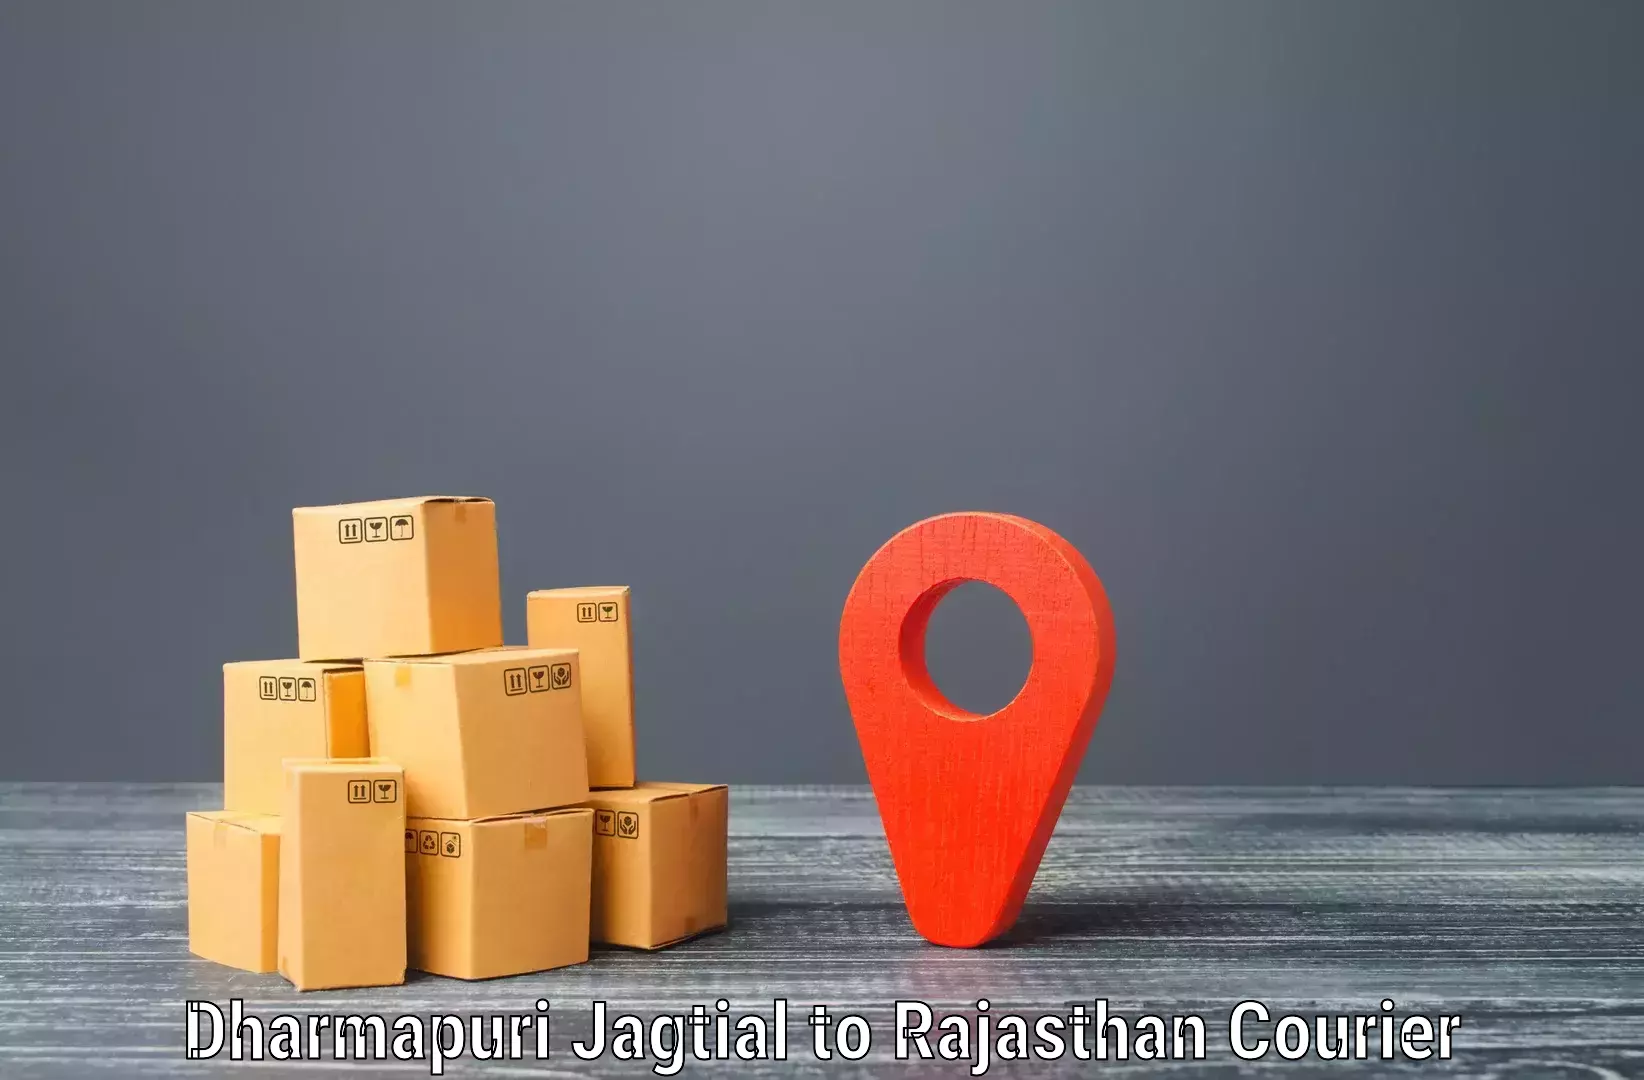 24-hour courier services Dharmapuri Jagtial to Chittorgarh